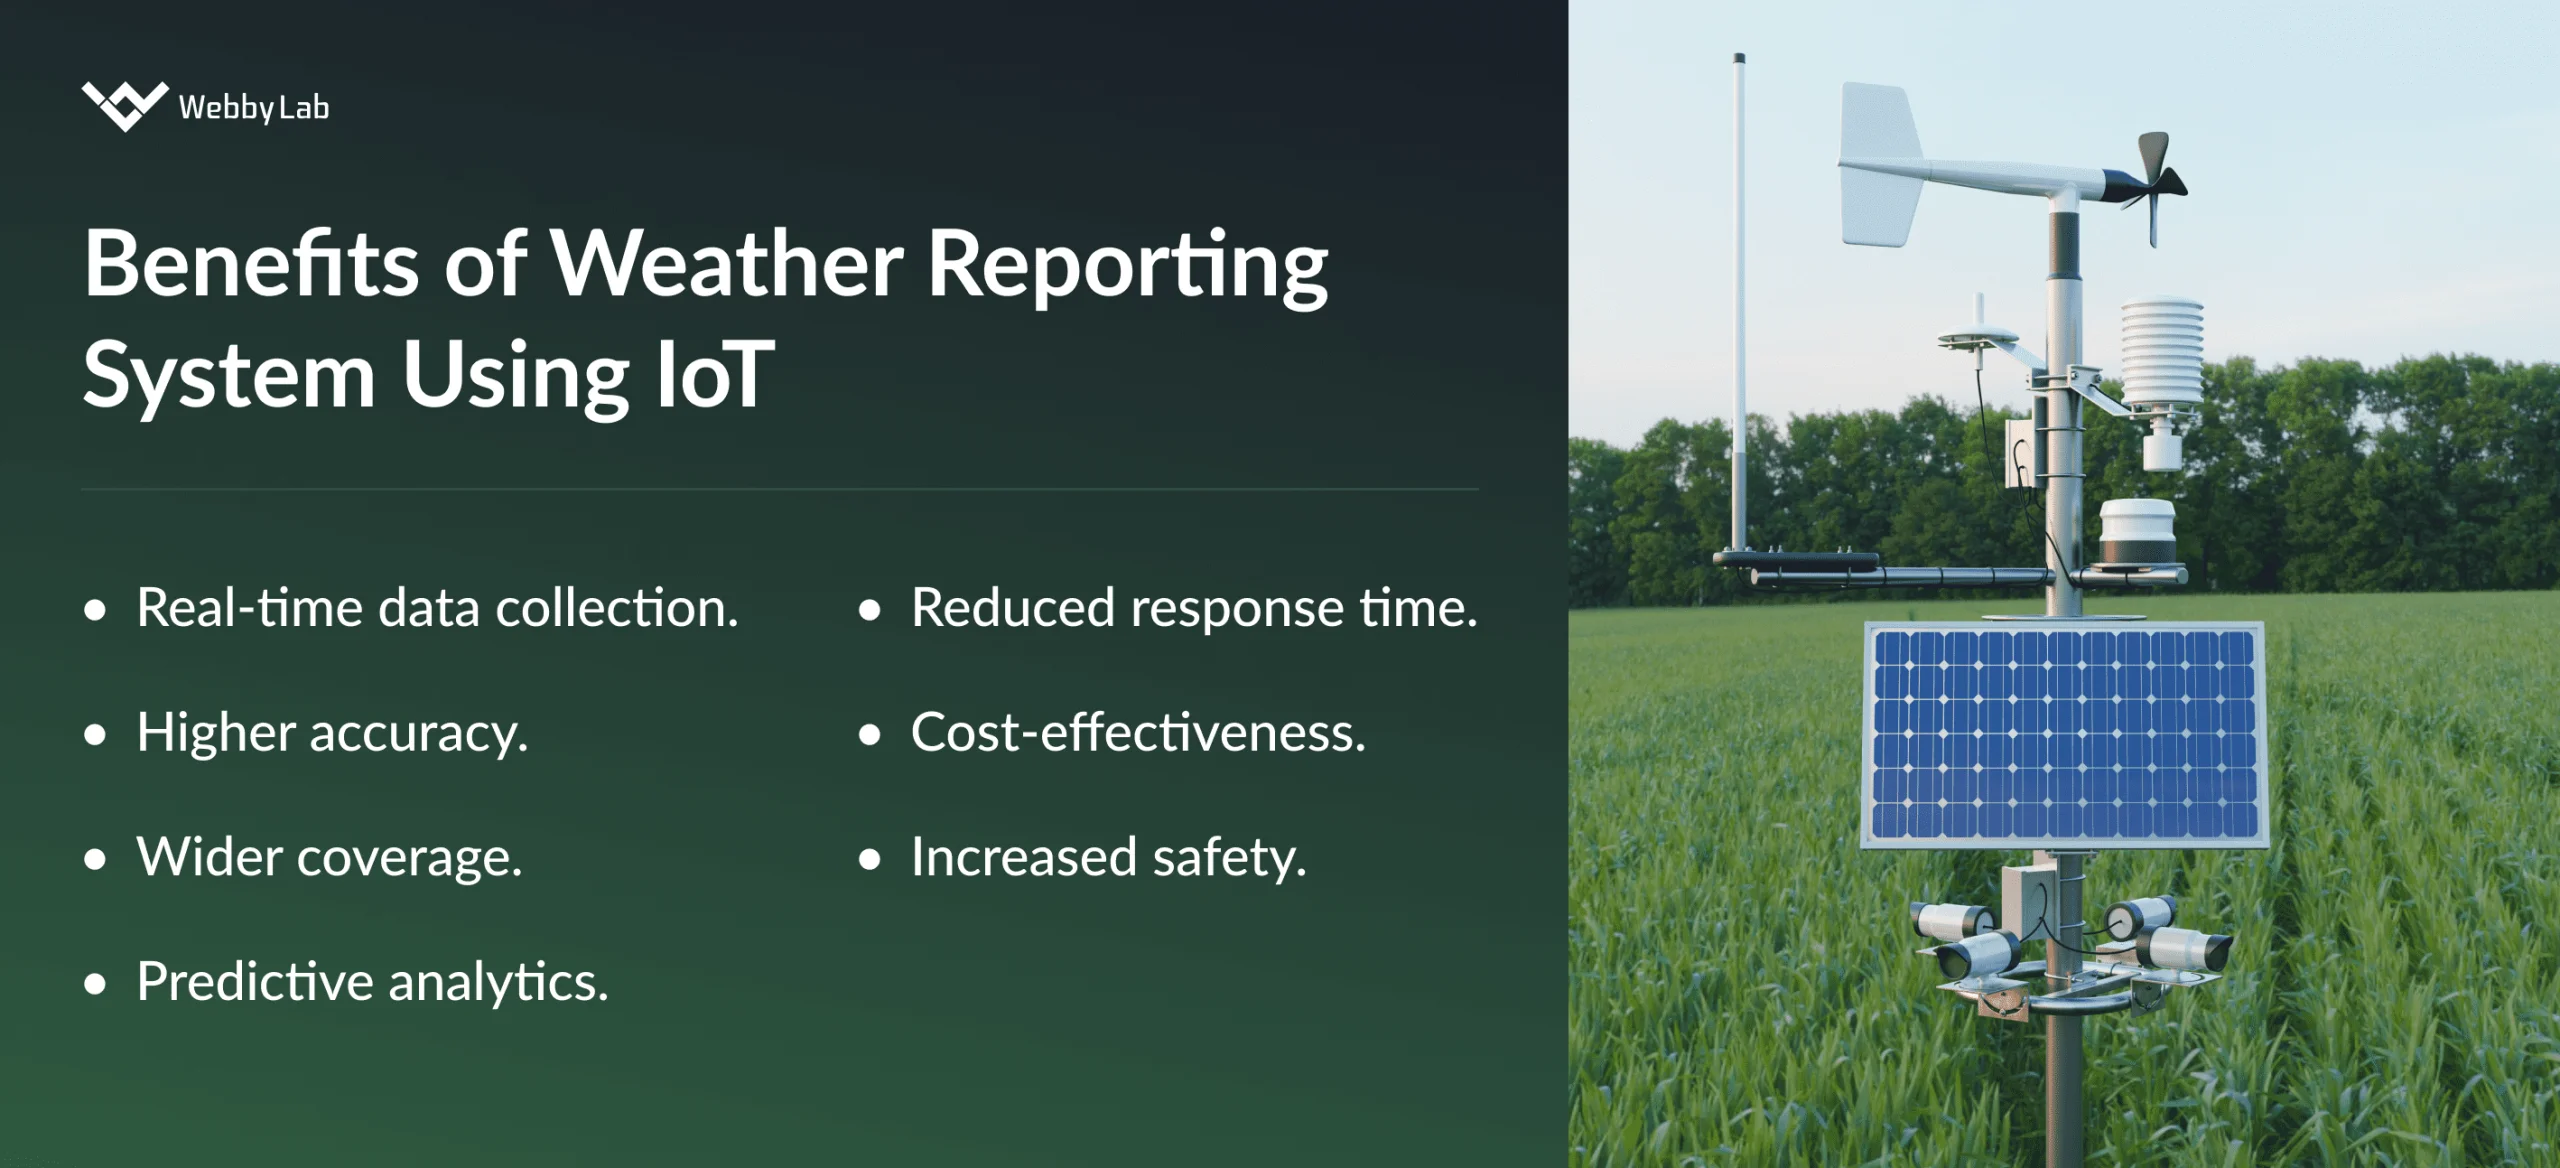 Benefits of Weather Reporting System Using IoT